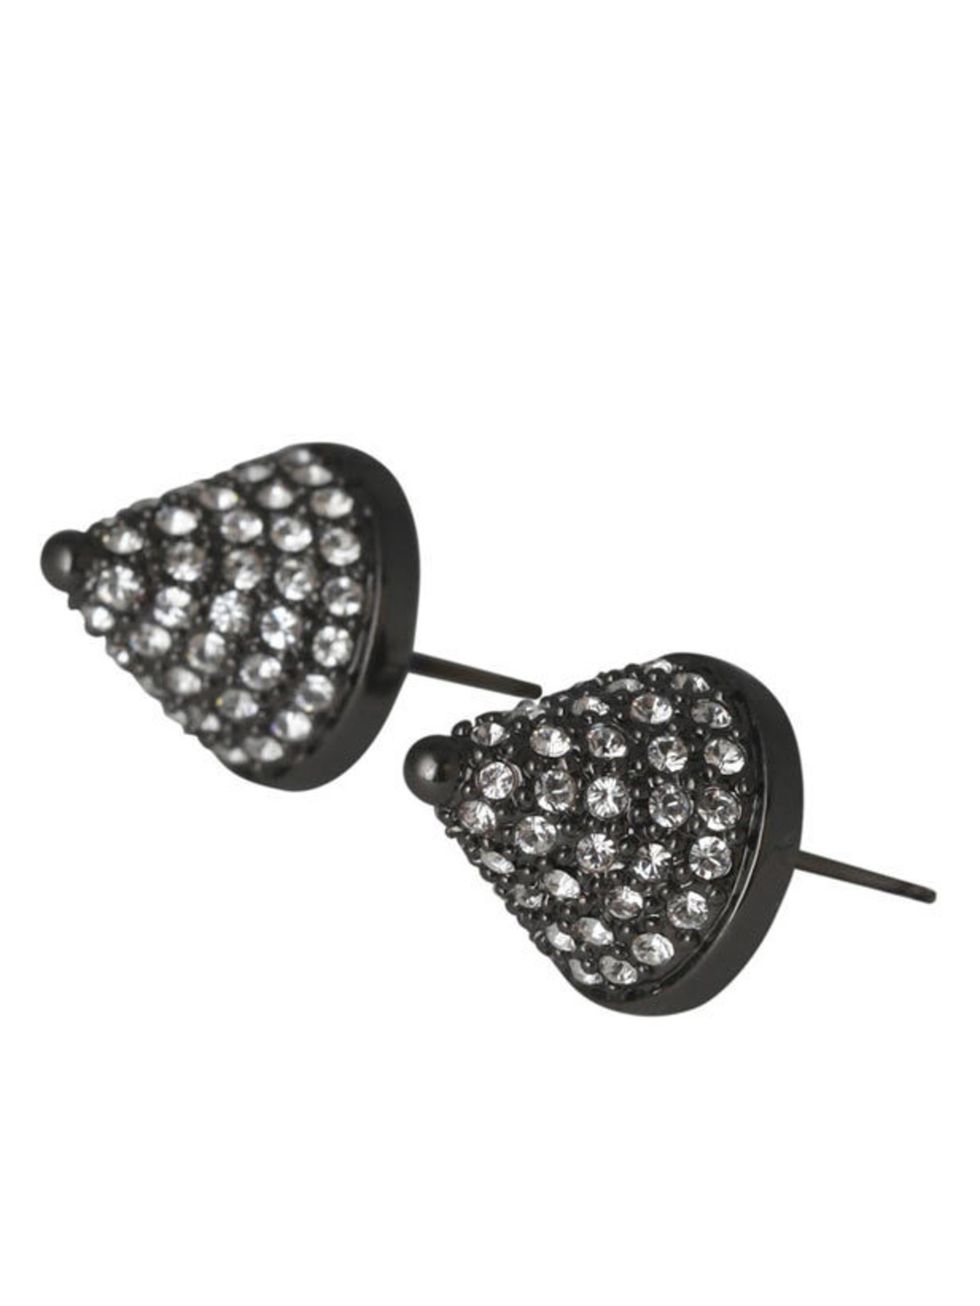 <p>Eddie Borgo cone stud earrings, £205, available from <a href="http://www.liberty.co.uk/fcp/product/Liberty//Gunmetal-Pave-Cone-Stud-Earrings-Eddie-Borgo-/62689">Liberty</a></p>